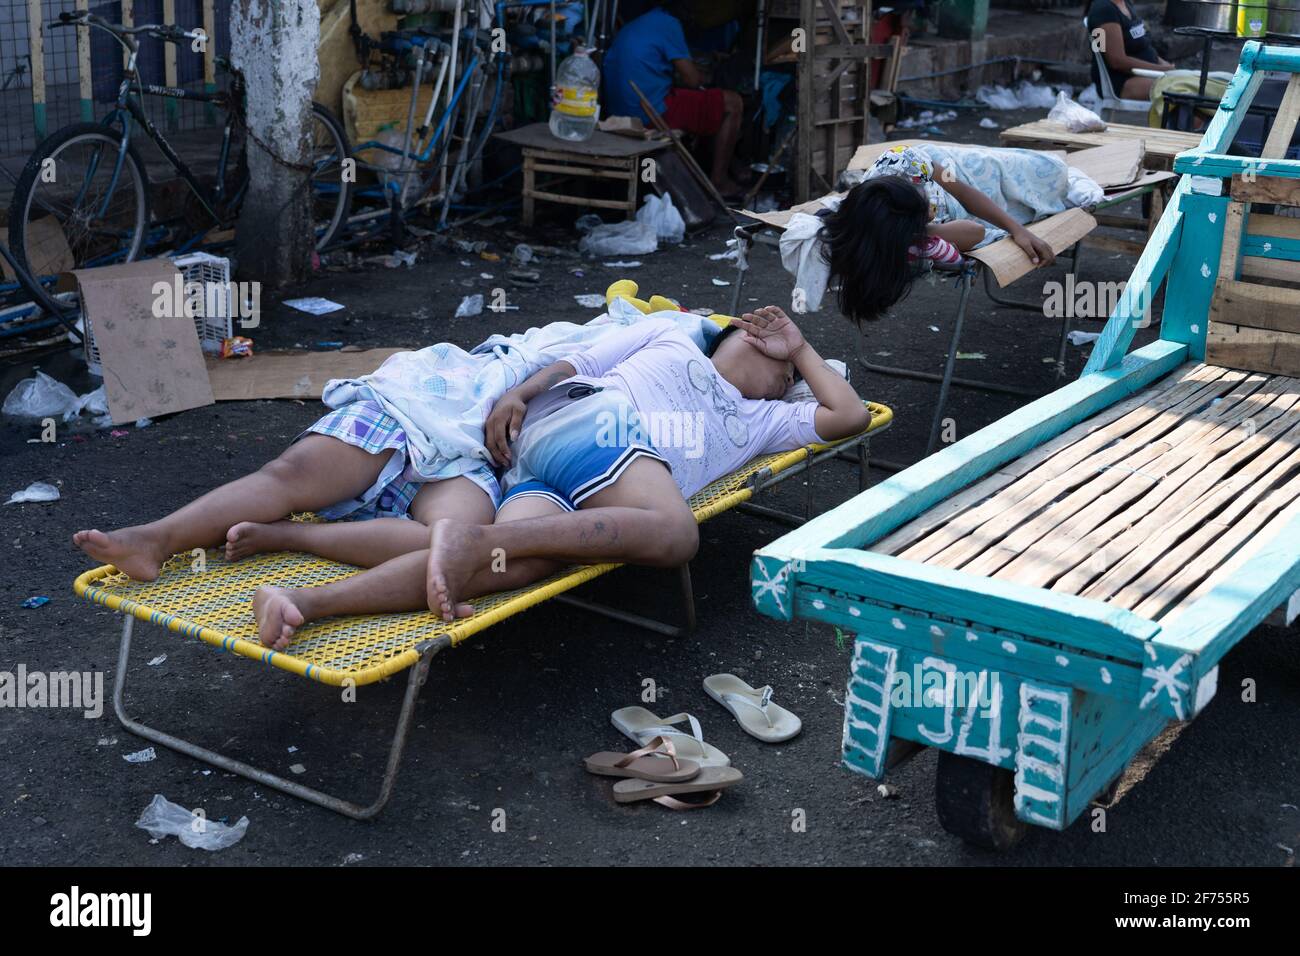 Homeless people sleeping on makeshift beds in a poor area of Cebu City, Philippines Stock Photo